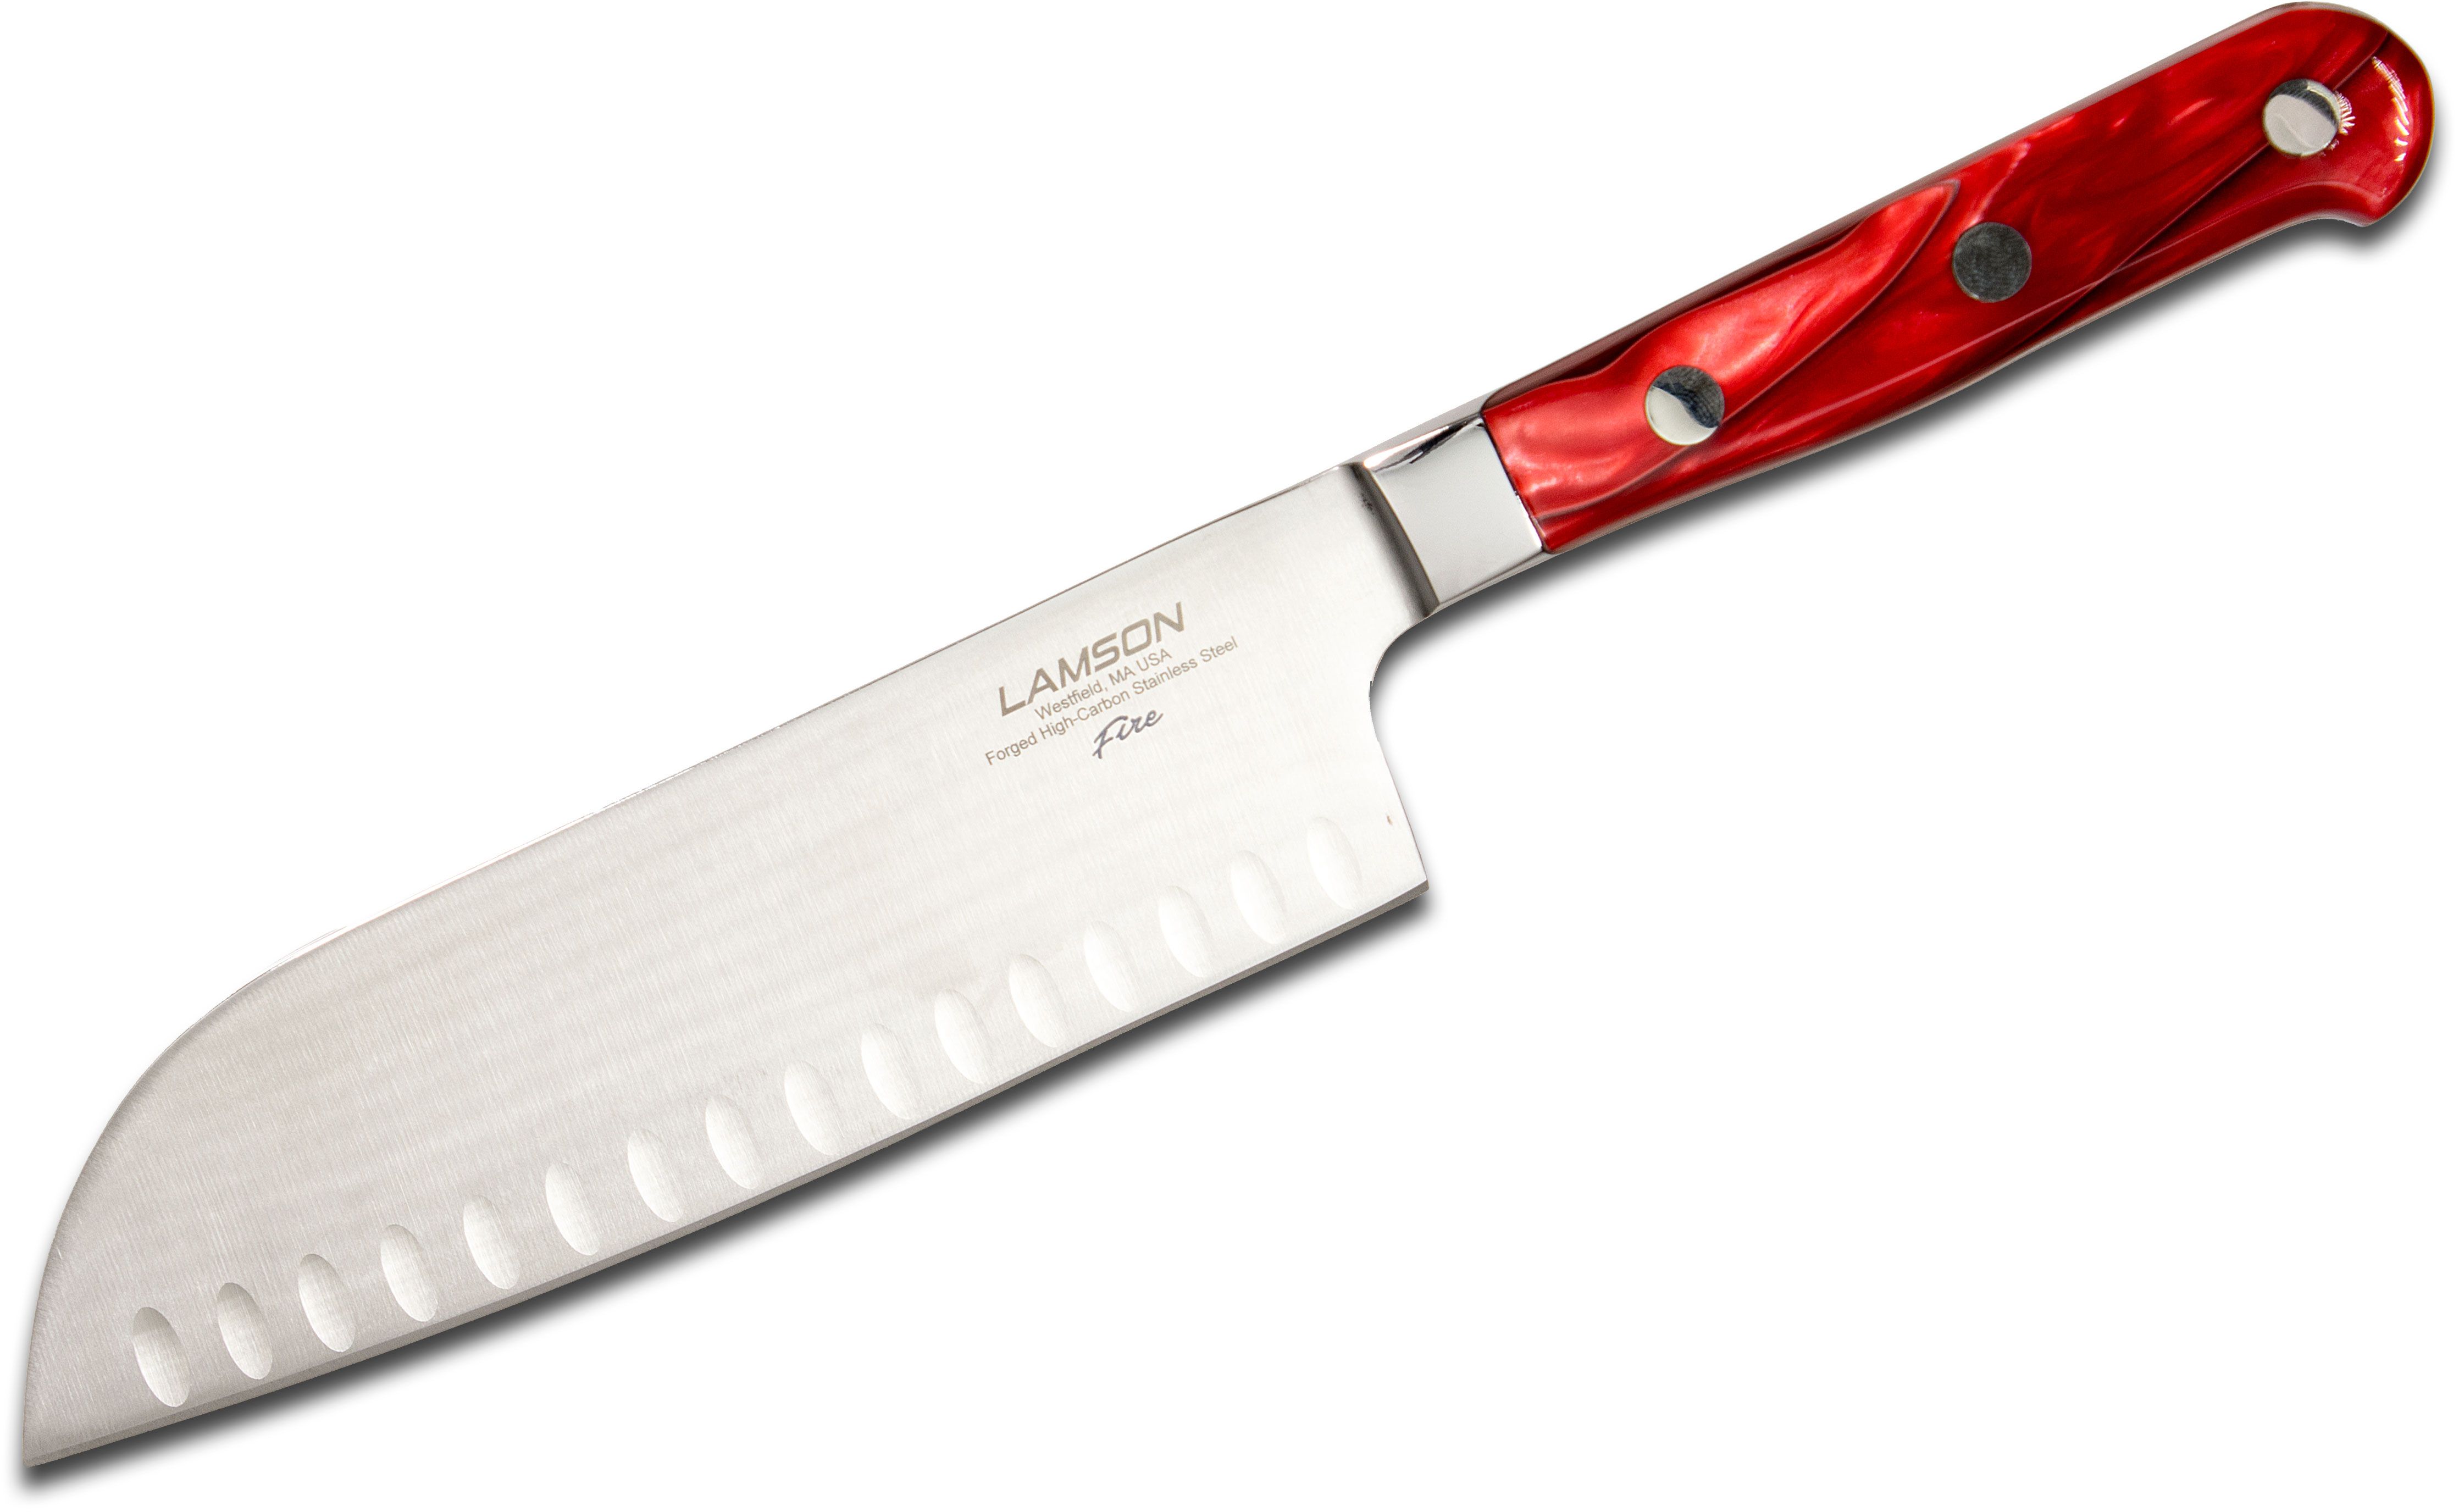 Lamson Fire Forged 6-inch Chef Knife